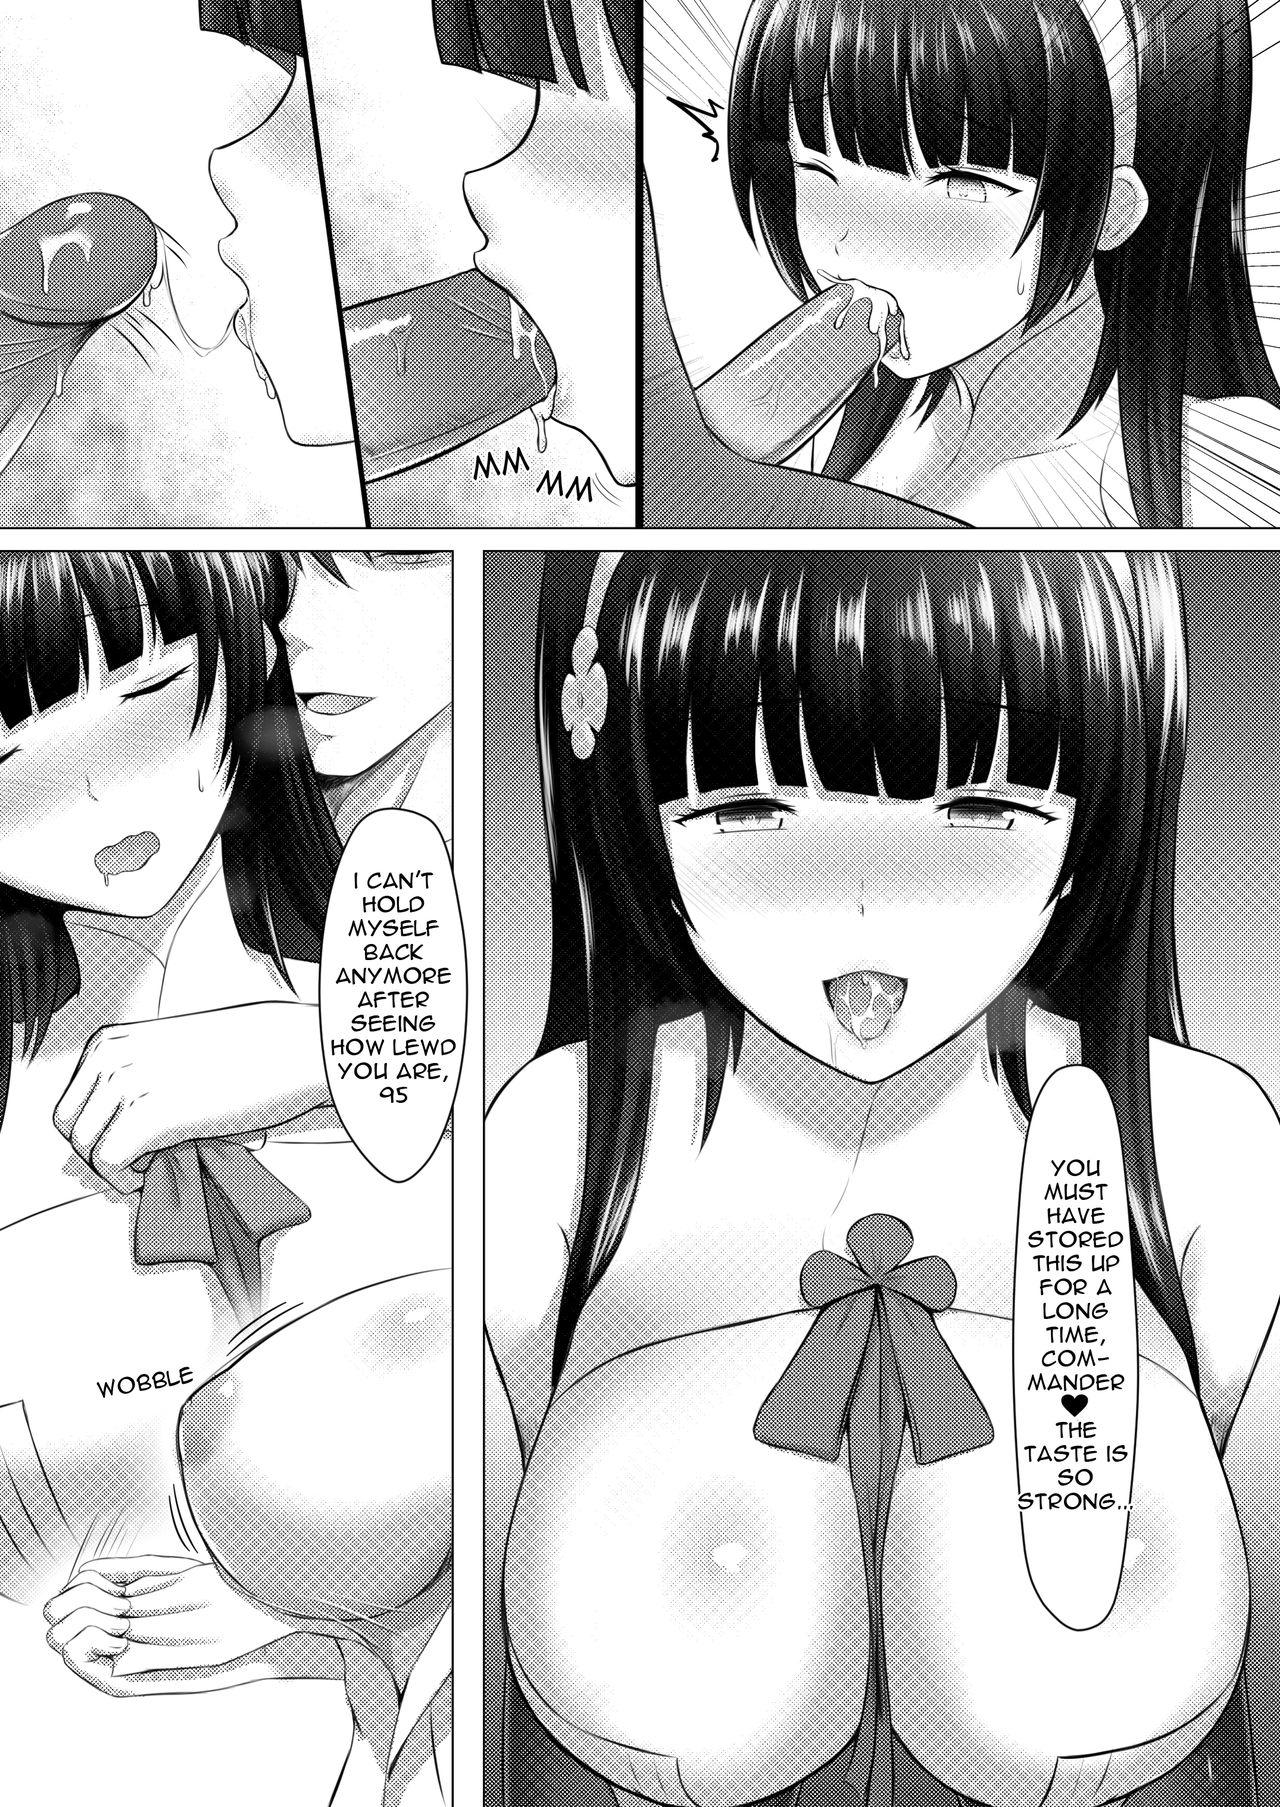 Foda A Lovely Flower's Gift - Girls frontline Fucked - Page 10